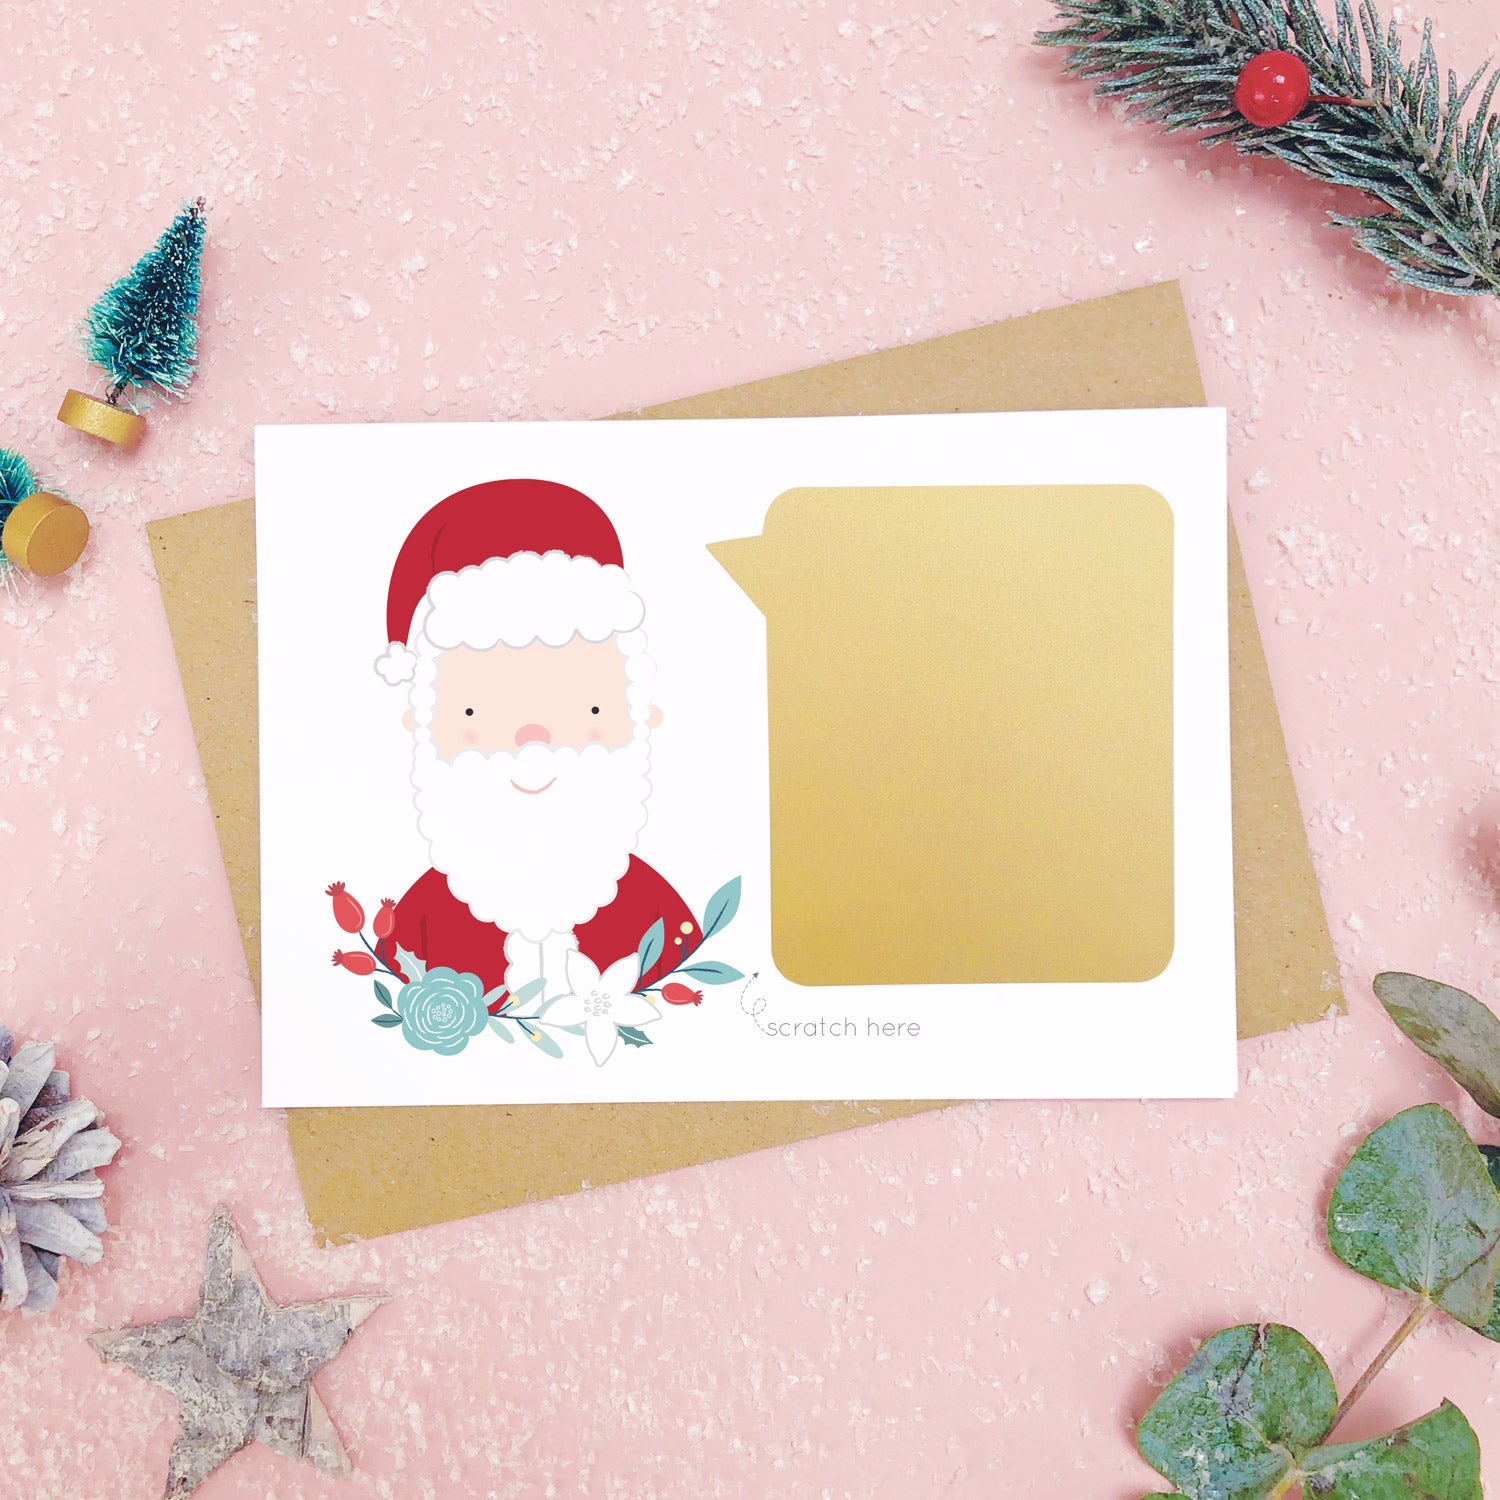 A santa scratch card with the gold panel attached to the front before it is scratched off. Shot on a pink background with green and grey festive props.